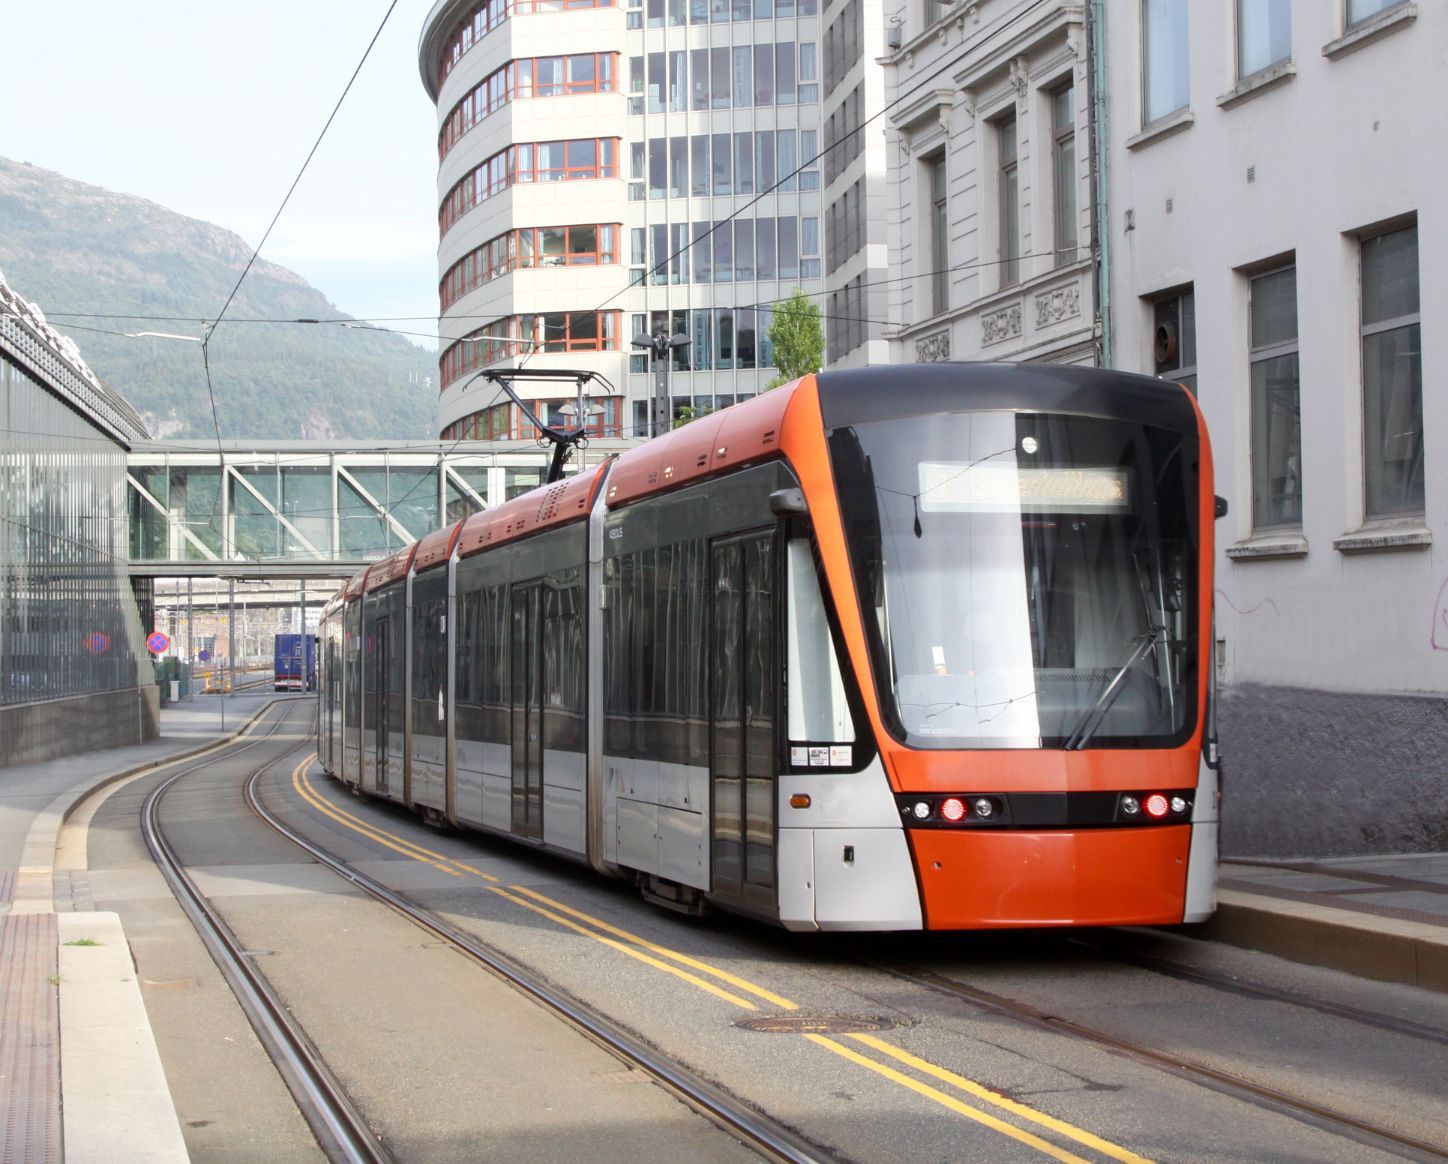 The Bergen Light Rail runs from the airport to the city centre in around 35 minutes, with various stops along the way. 